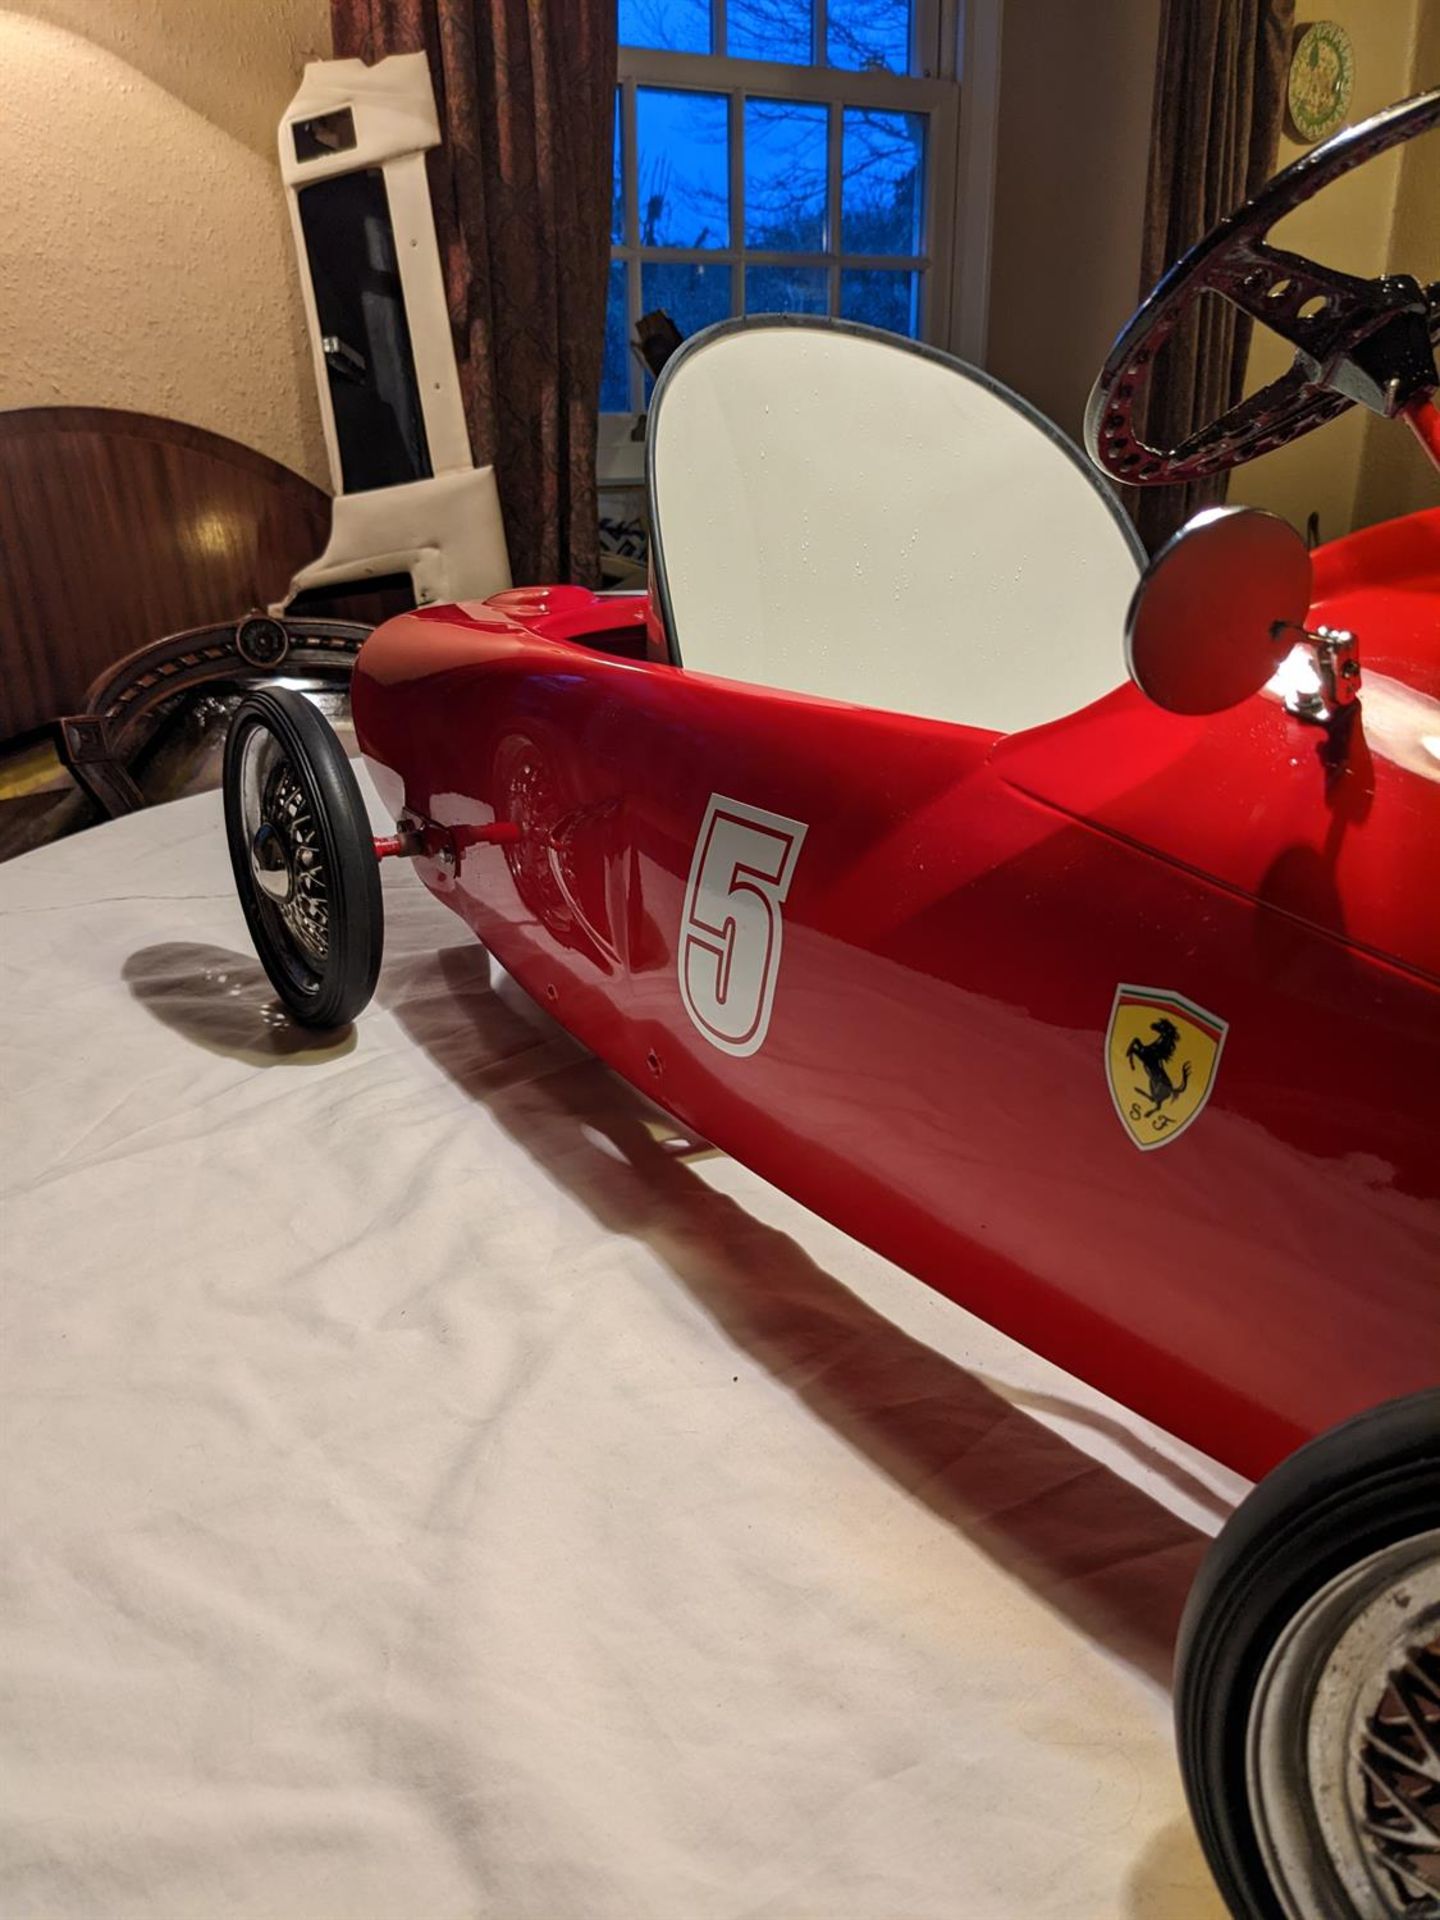 Ferrari Spa 156 Sharknose Morellet-Guerineau Pedal Car Fastidioulsy Restored - Image 7 of 8